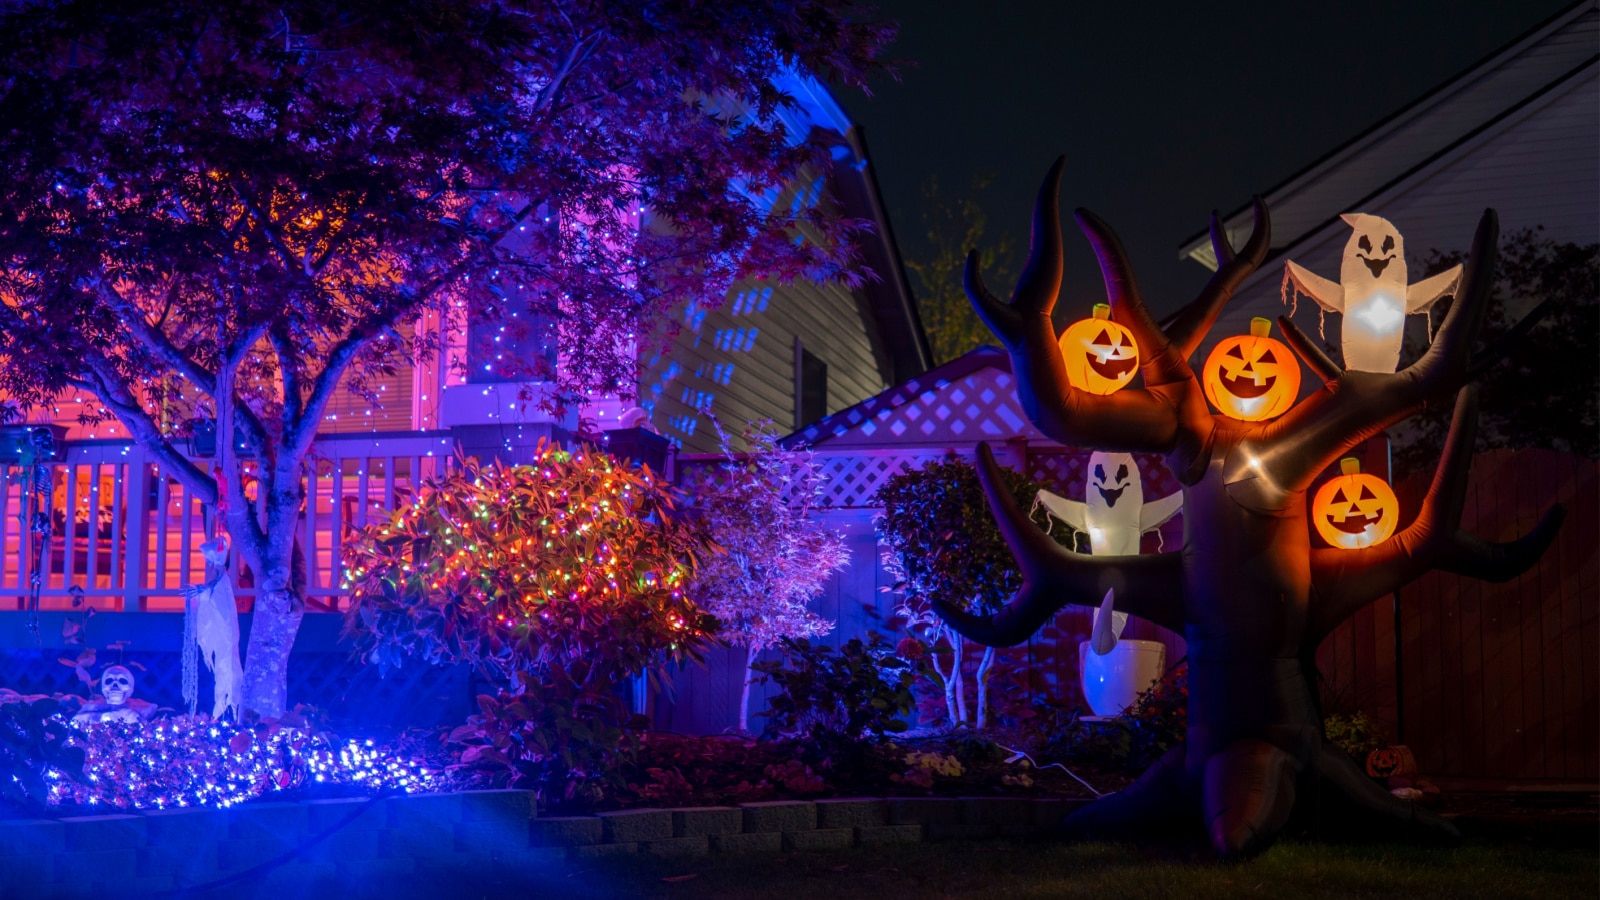 Night Halloween house outdoor decorations with glowing inflatable pumpkins and ghosts purple lights and orange garlands